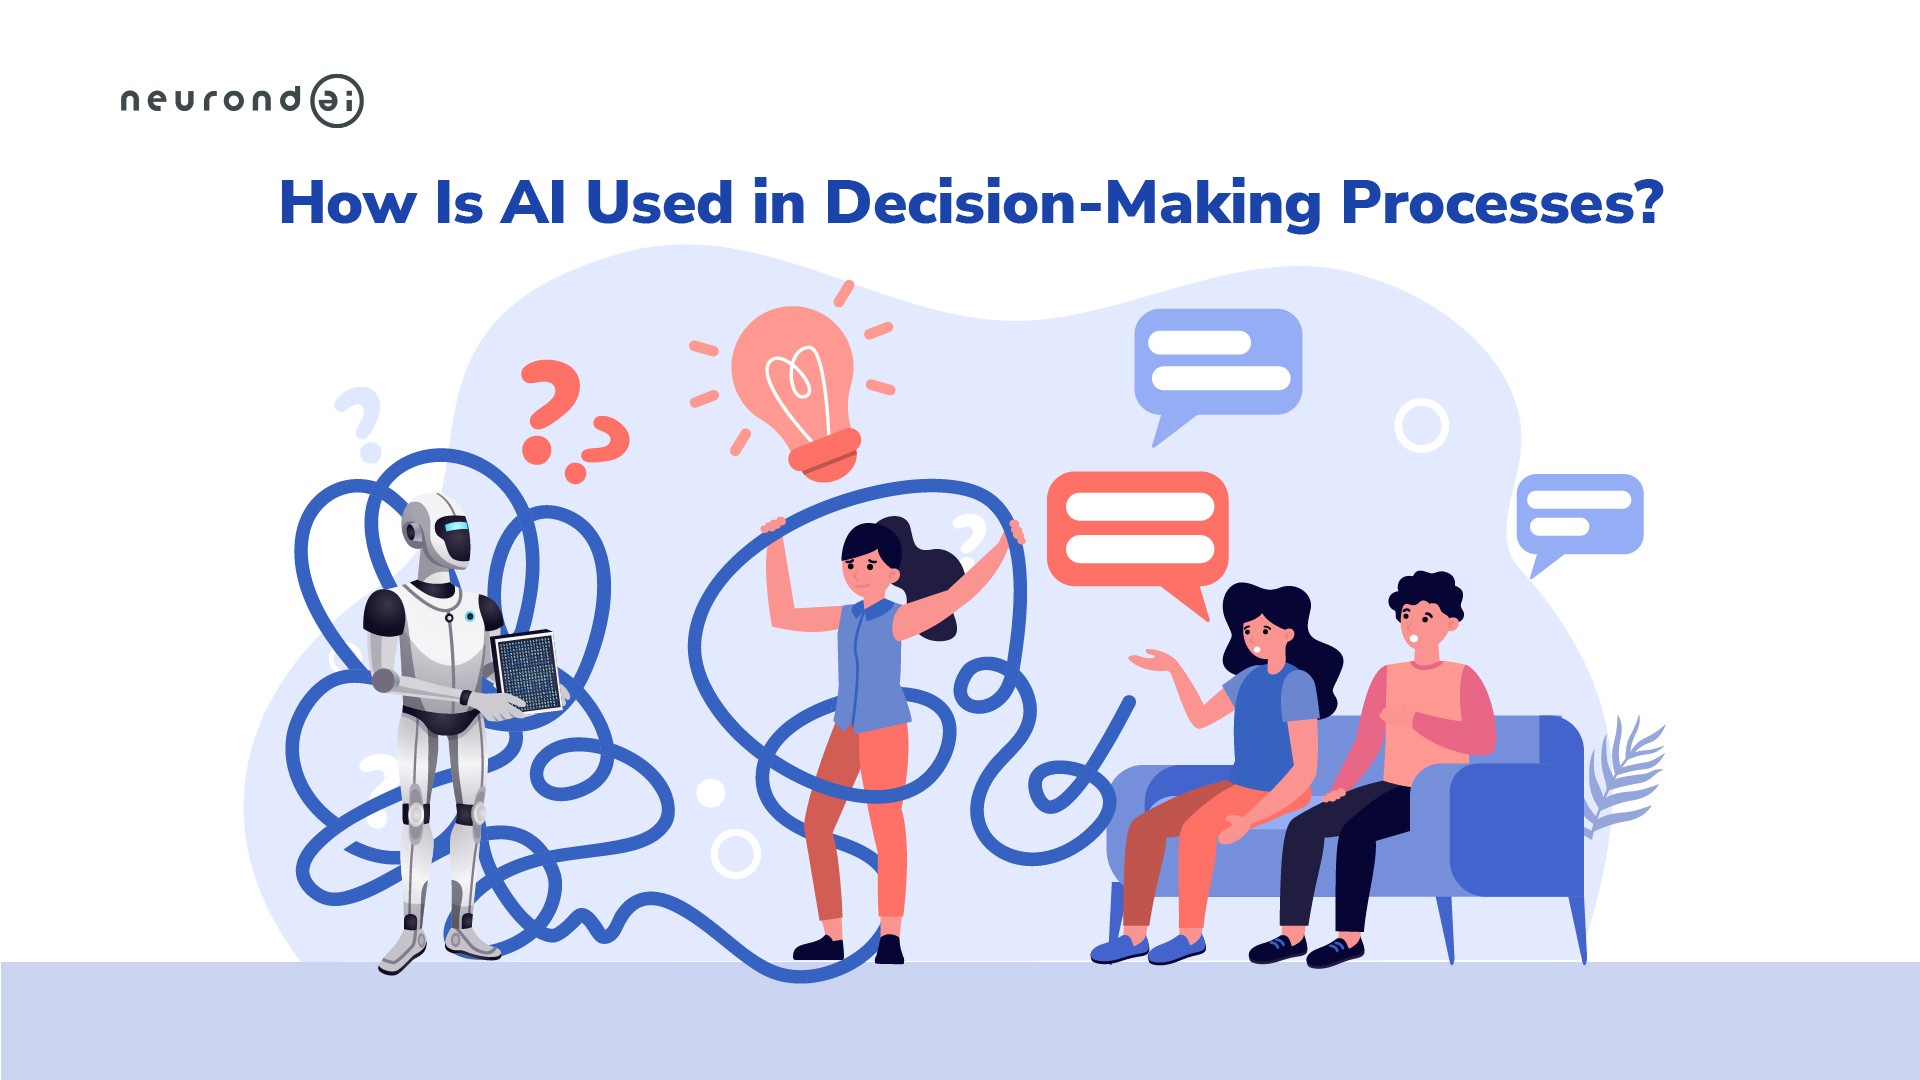 How Is AI Used in Decision-Making Processes?